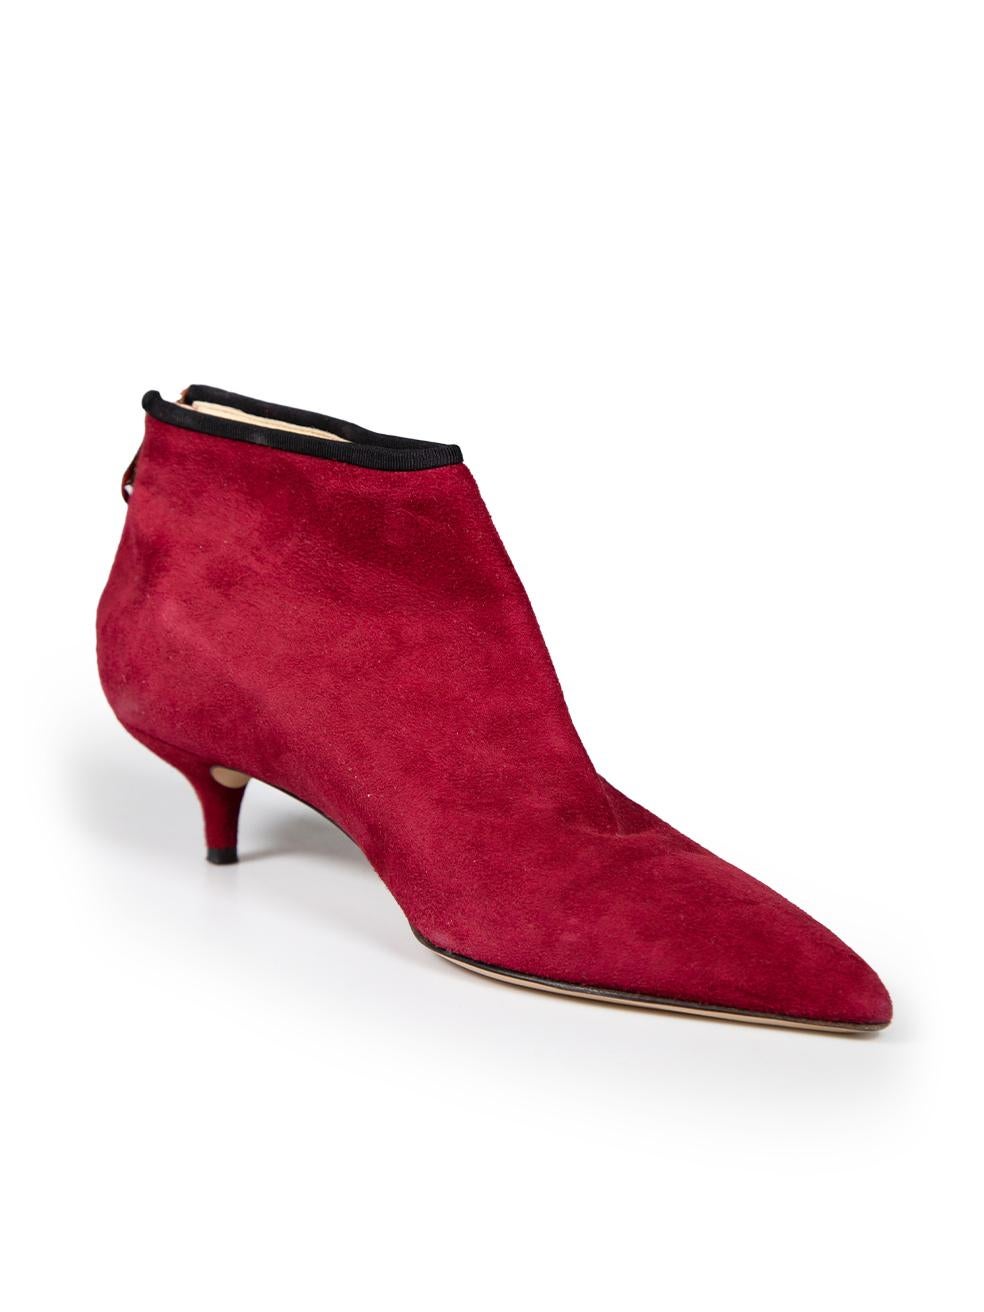 CONDITION is Very good. Minimal wear to boots is evident. Minimal wear to the suede sides with abrasions at boot edge and soles on this used Charlotte Olympia designer resale item. This item comes with original box.
 
 
 
 Details
 
 
 Red
 
 Suede
